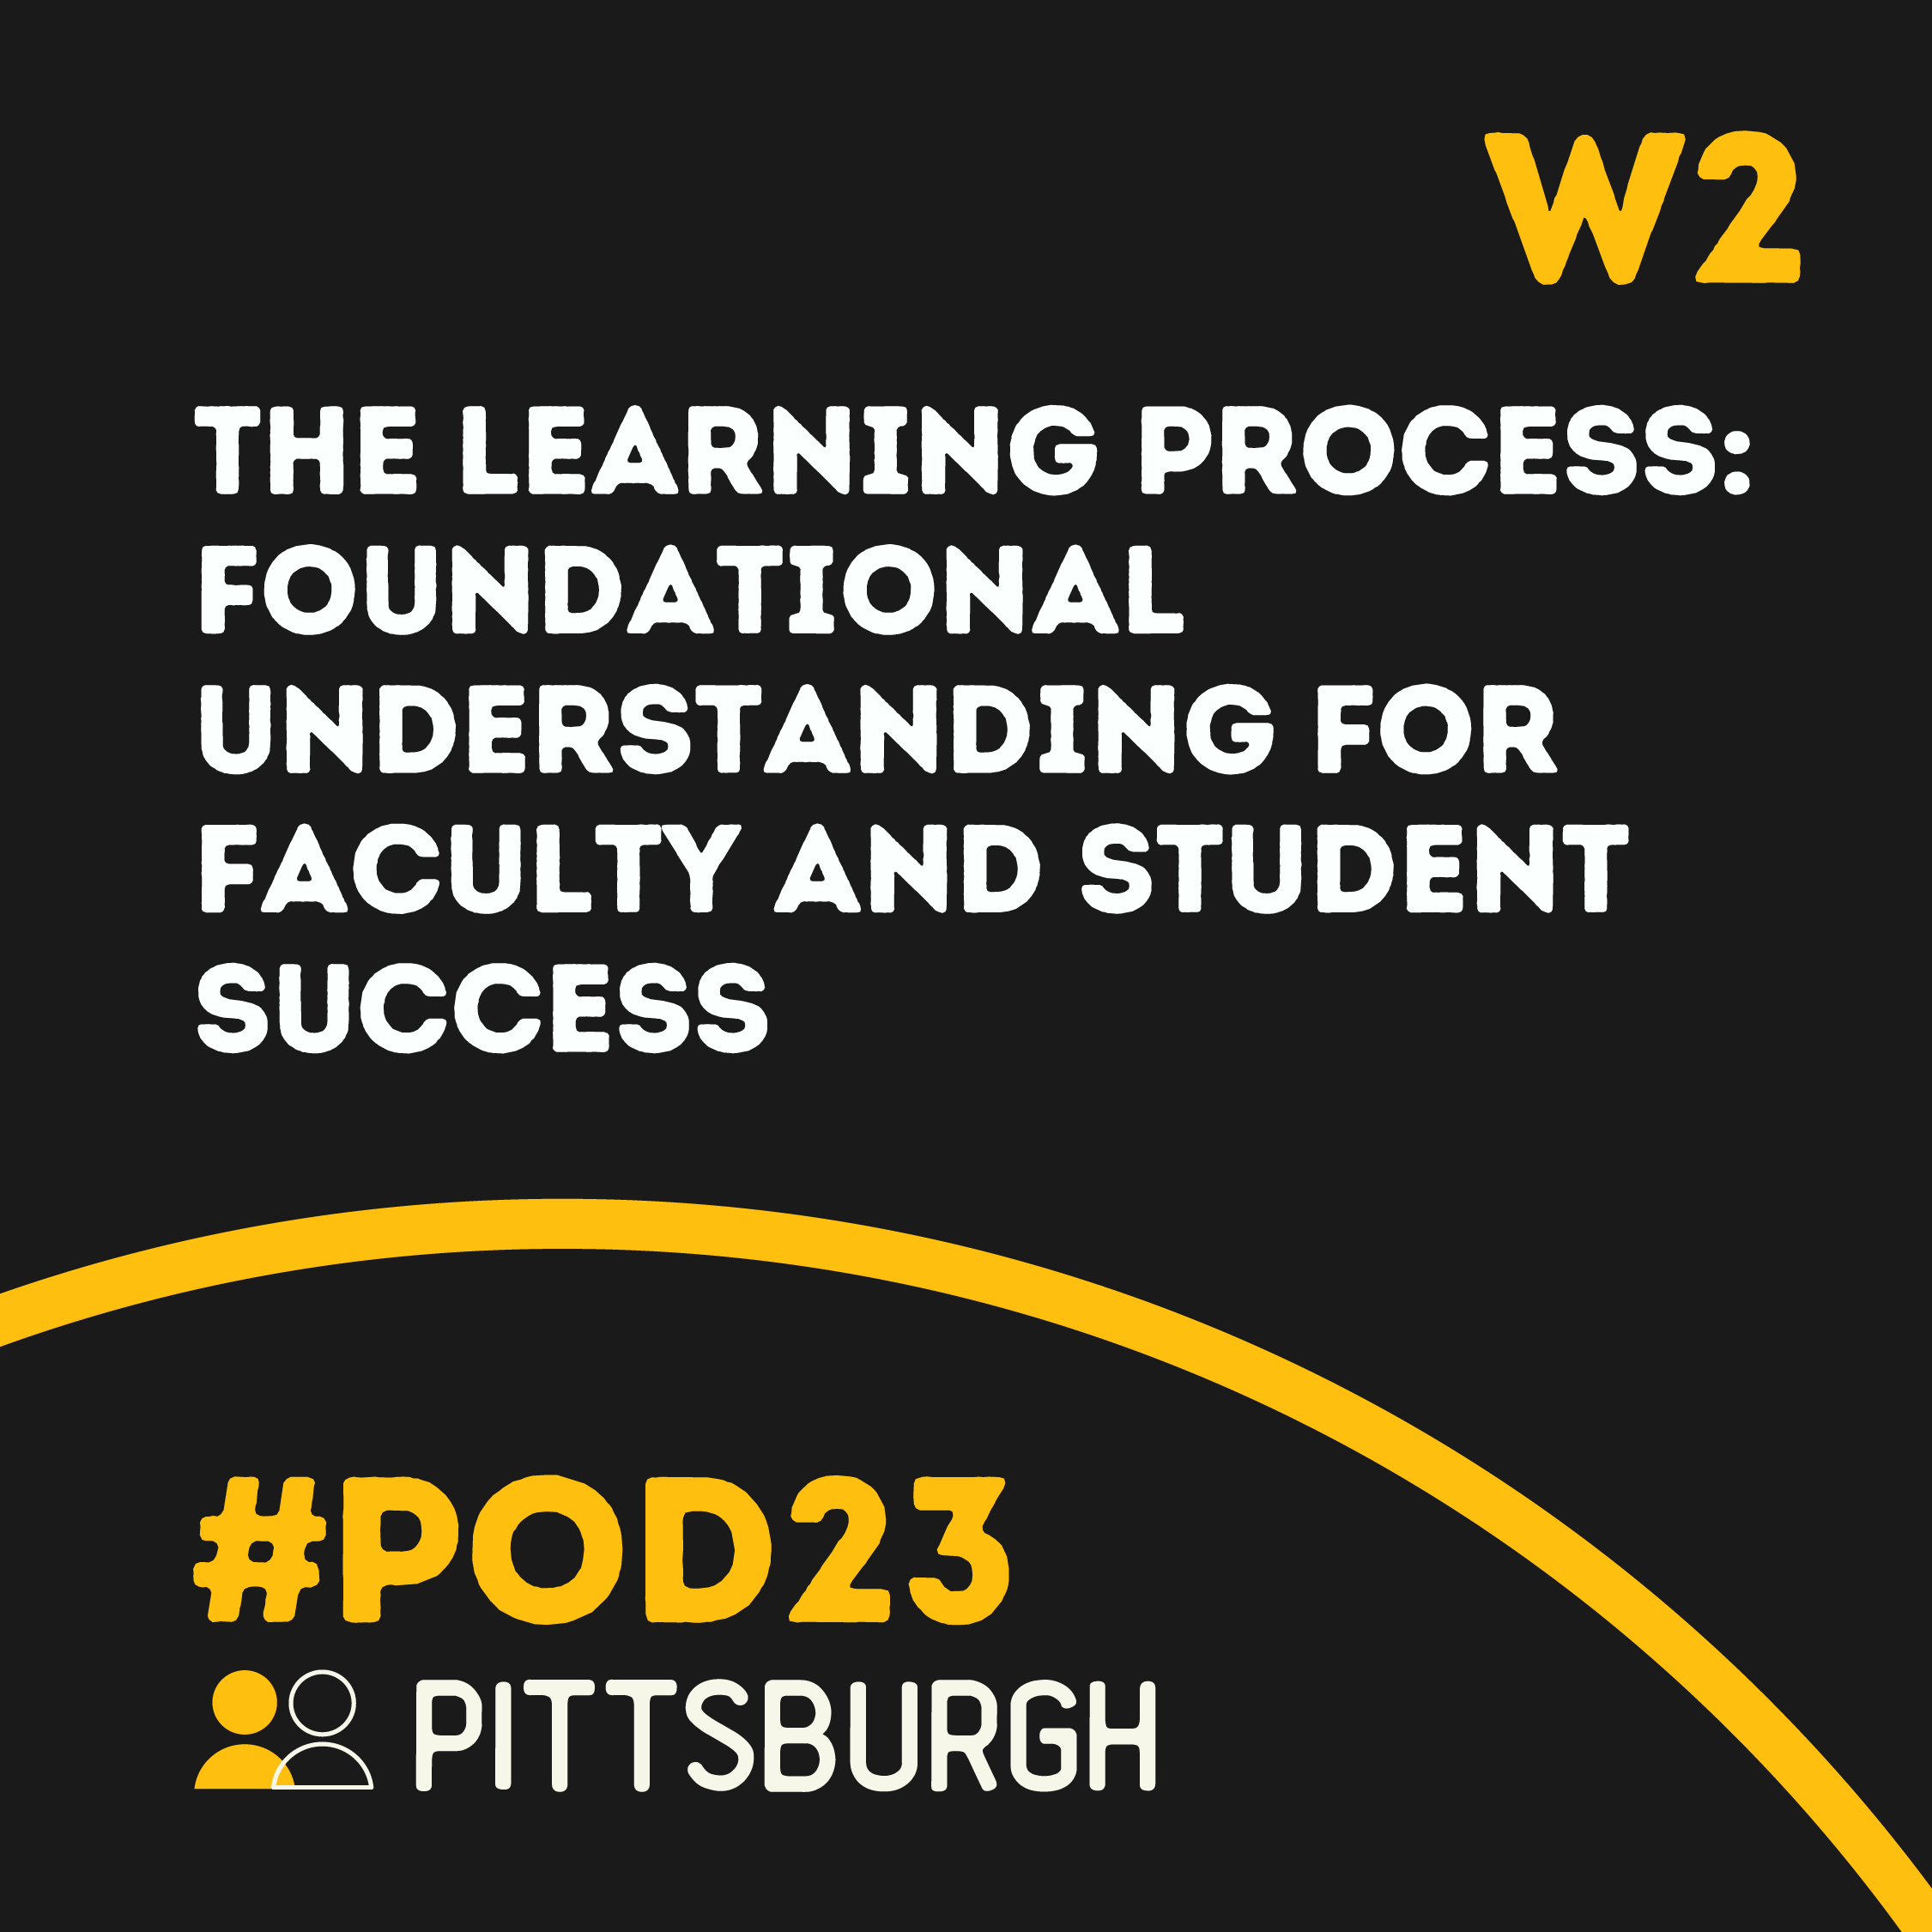 #POD23 W2: The Learning Process: Foundational Understanding for Faculty and Student Success